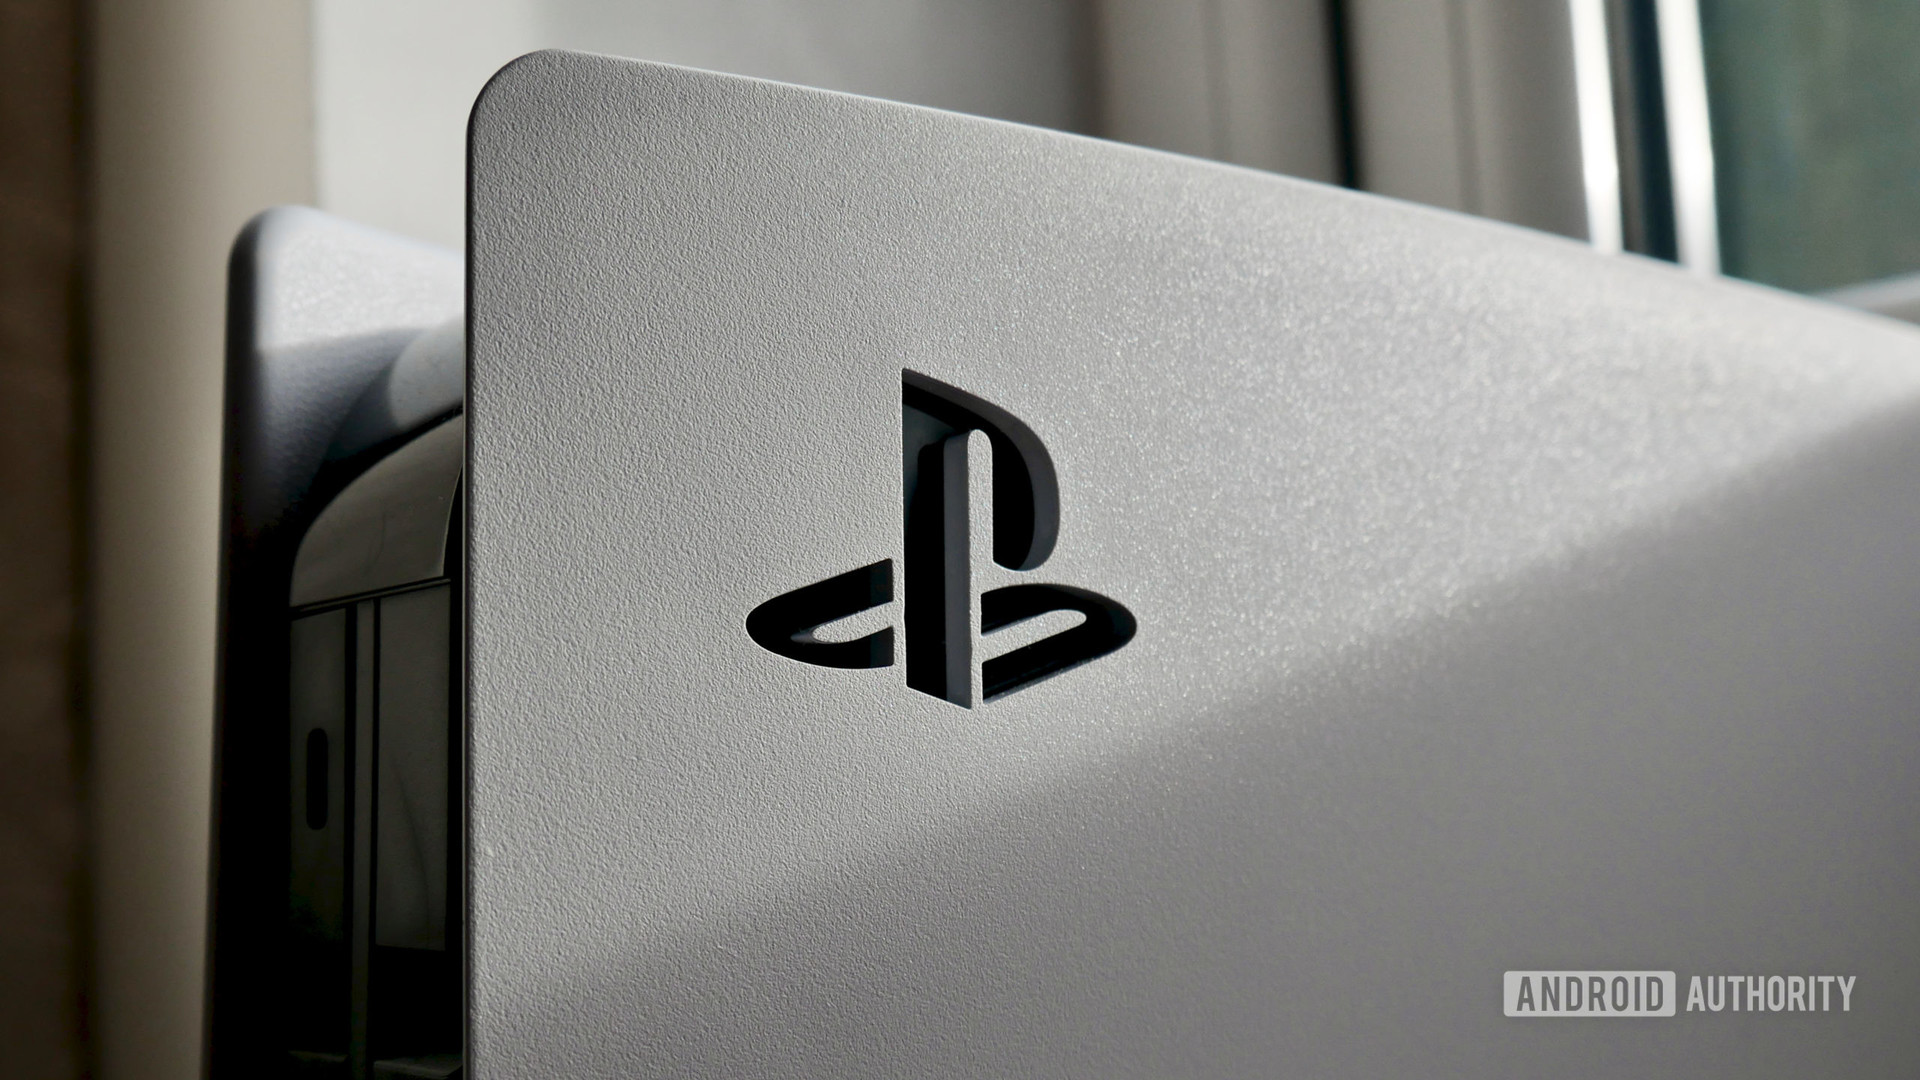 Sony Just Made A Huge Change To The PlayStation Store